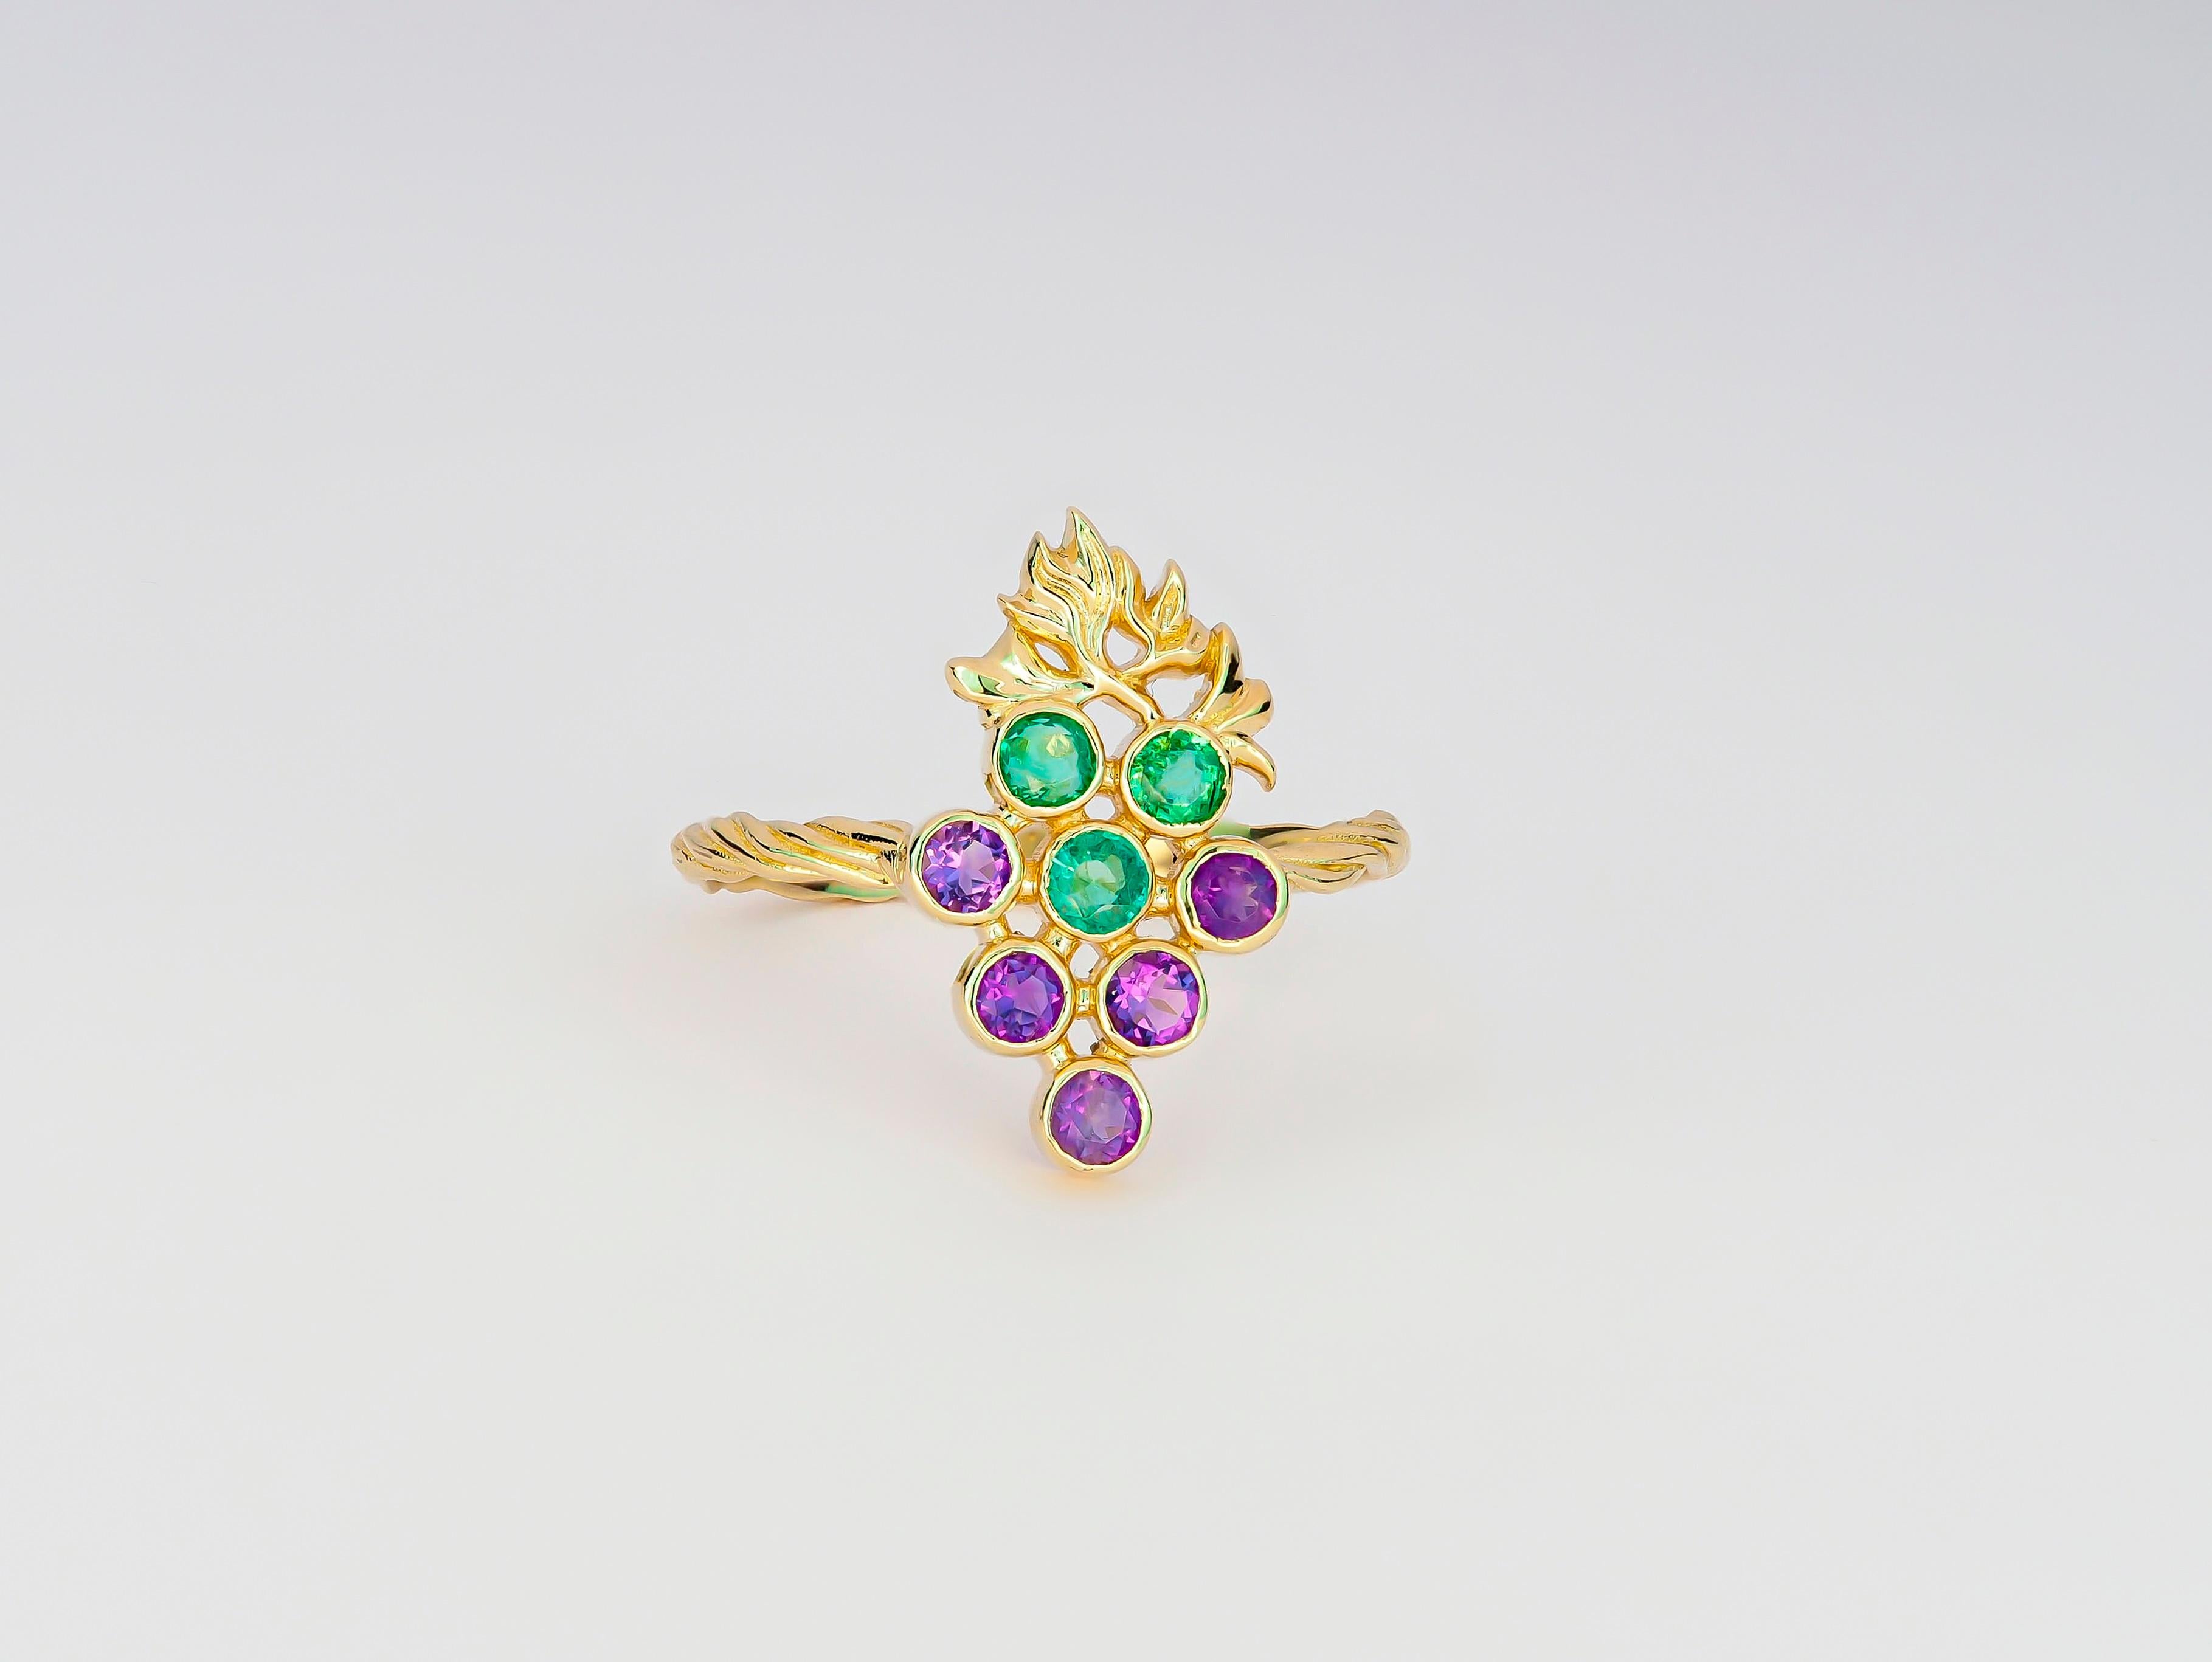 For Sale:  14k Gold Ring with Natural Emeralds and Amethysts. Grape gold ring. 3